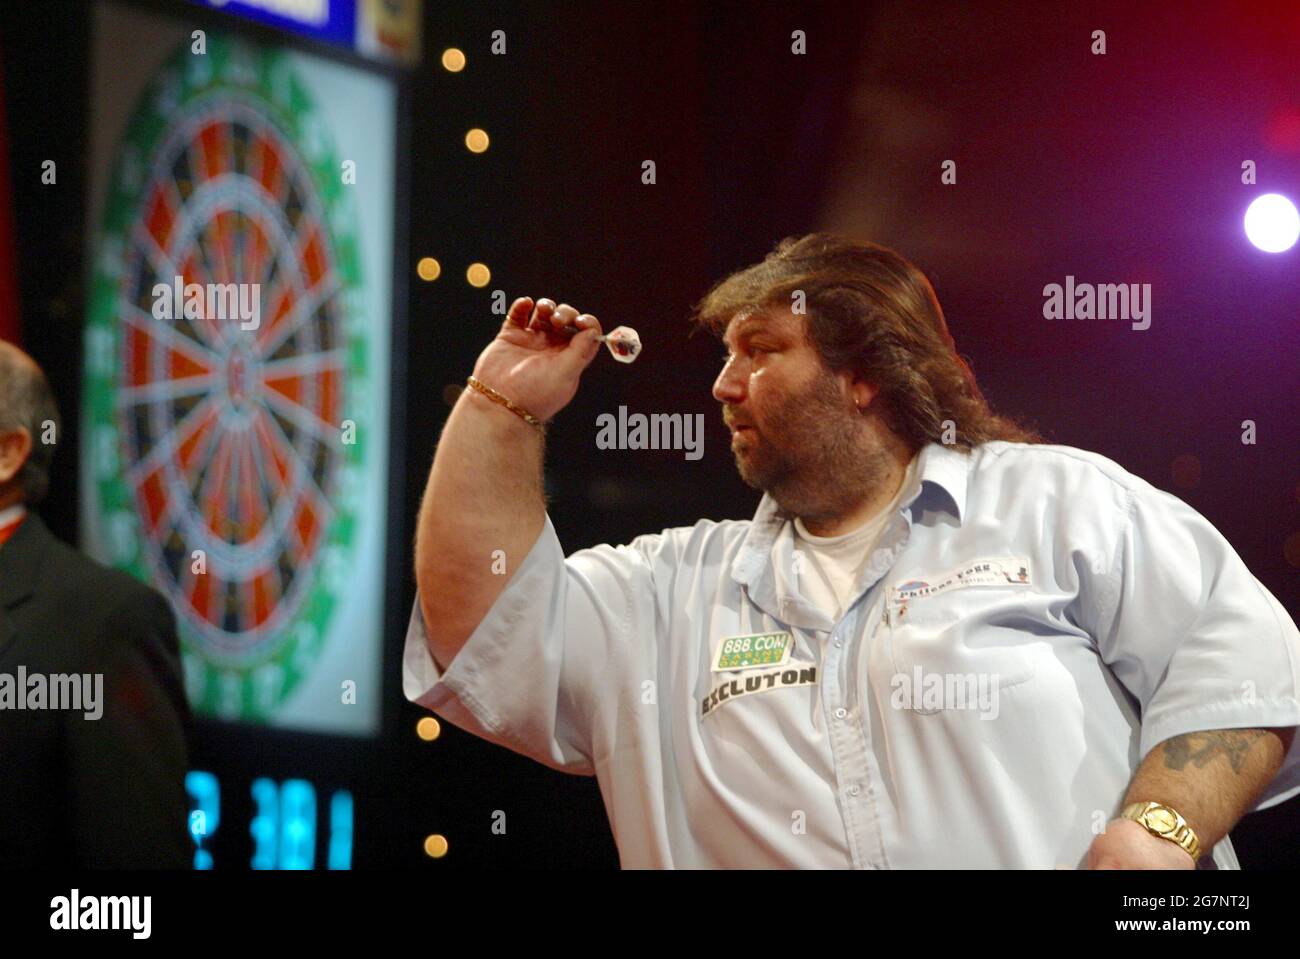 11 January, 2004: Kent publican ANDY FORDHAM prepares to throw a dart  during the World Professional Darts Championships Final, Fordham beat King  6 - 3, Lakeside, Frimley Green, Surrey, Photo: Neil Tingle/Action